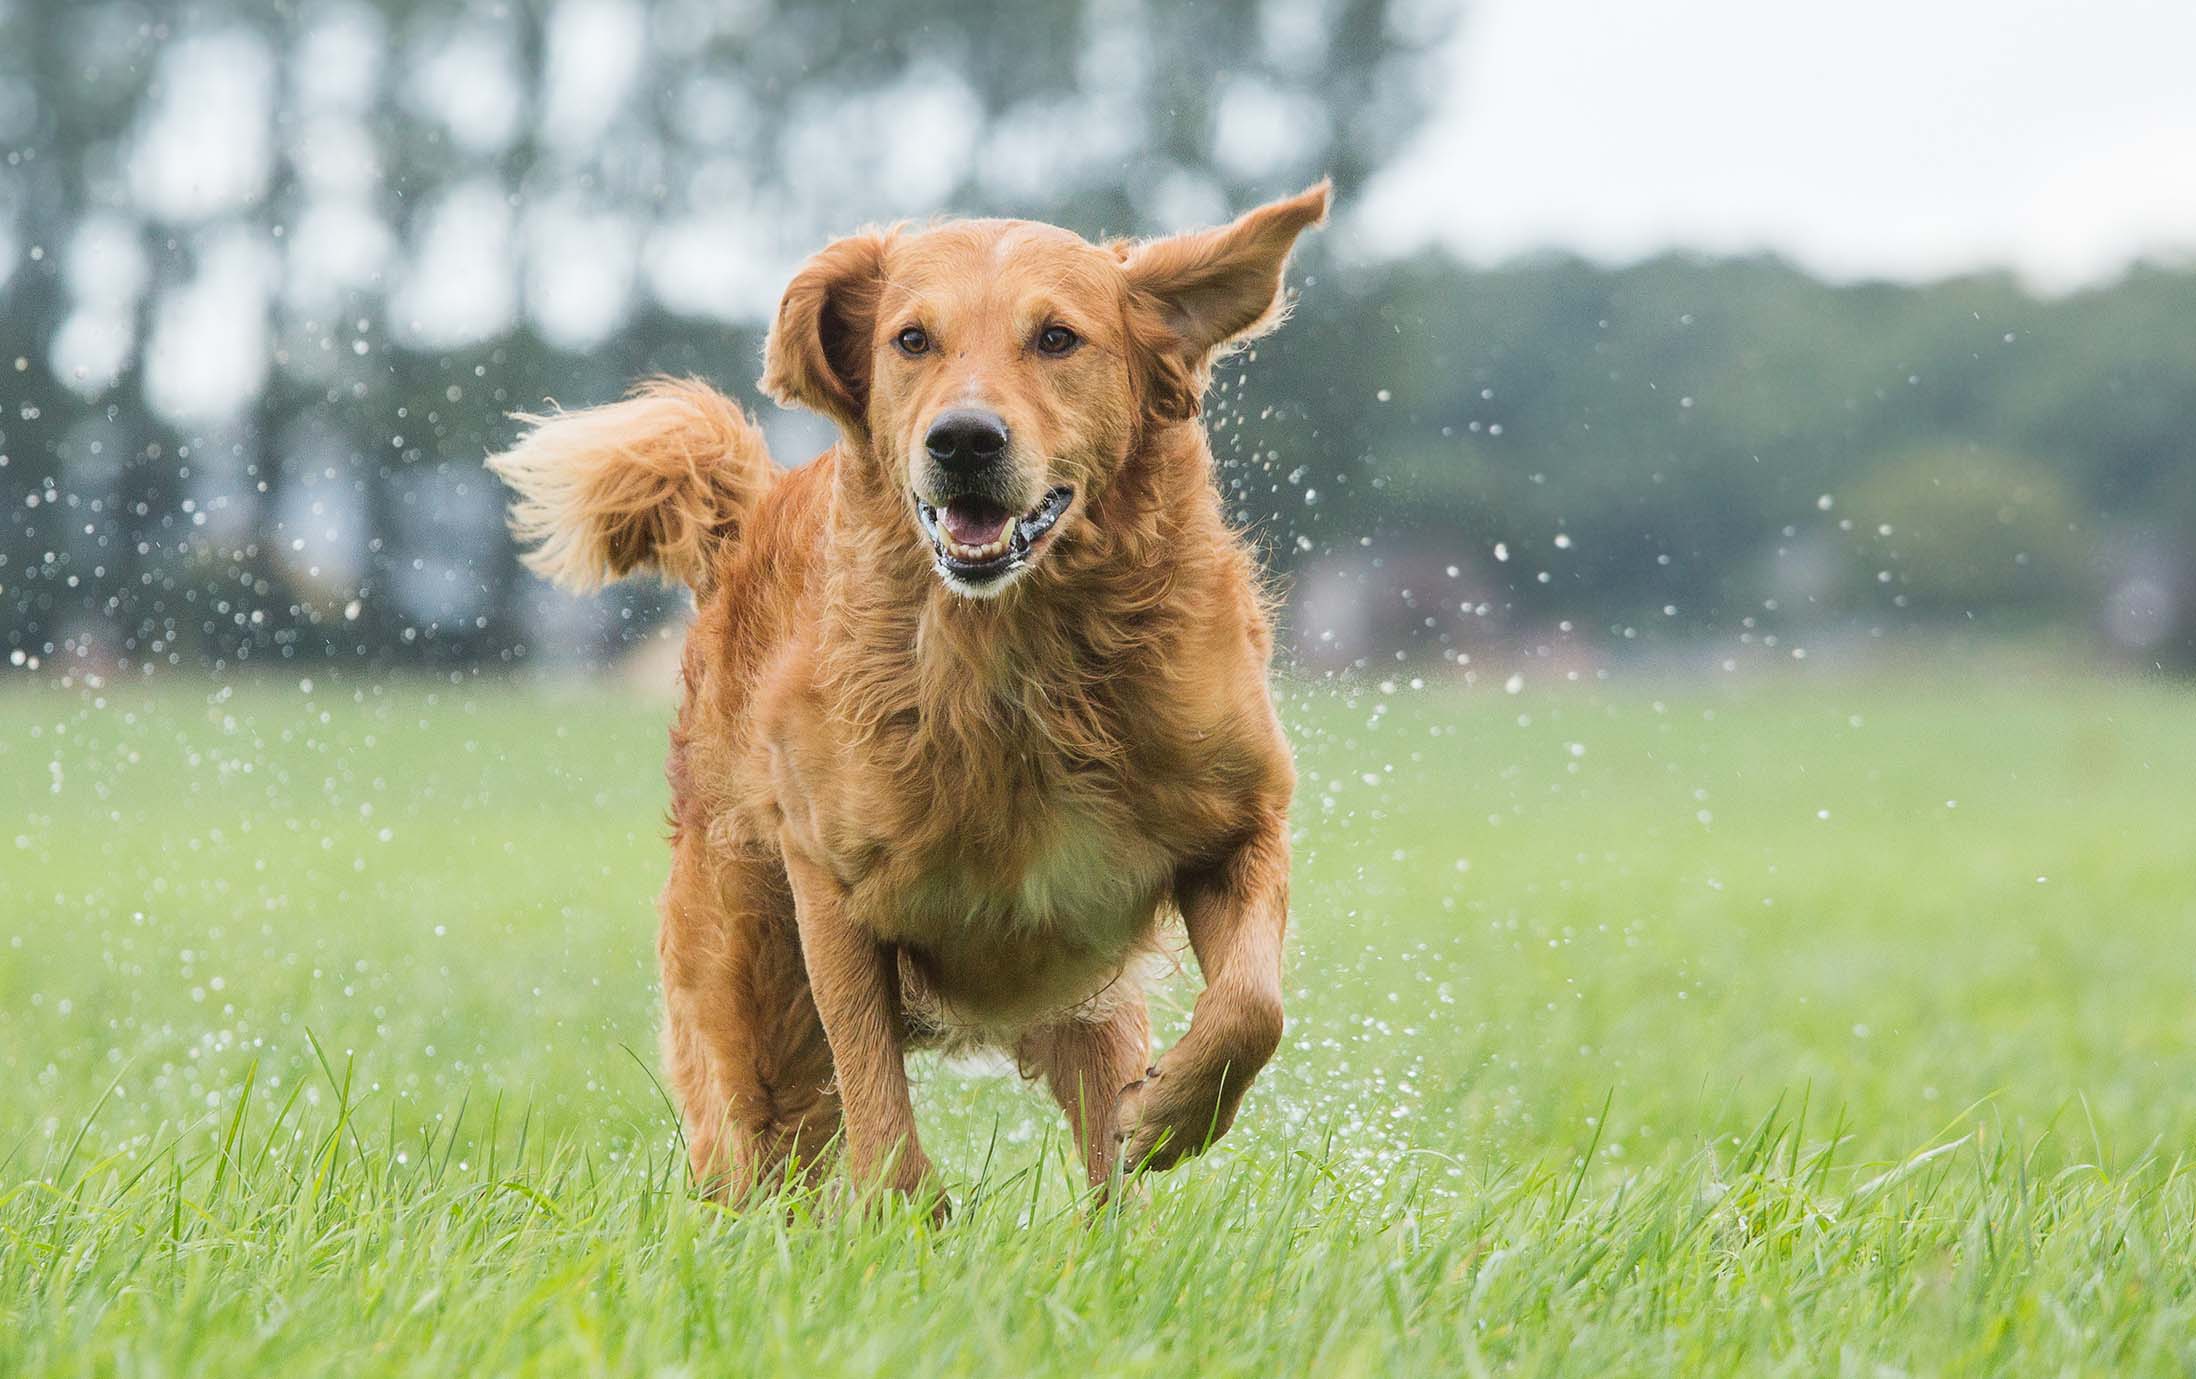 Look Out For These 5 Common Canine Health Issues to Keep Your Dog Happy